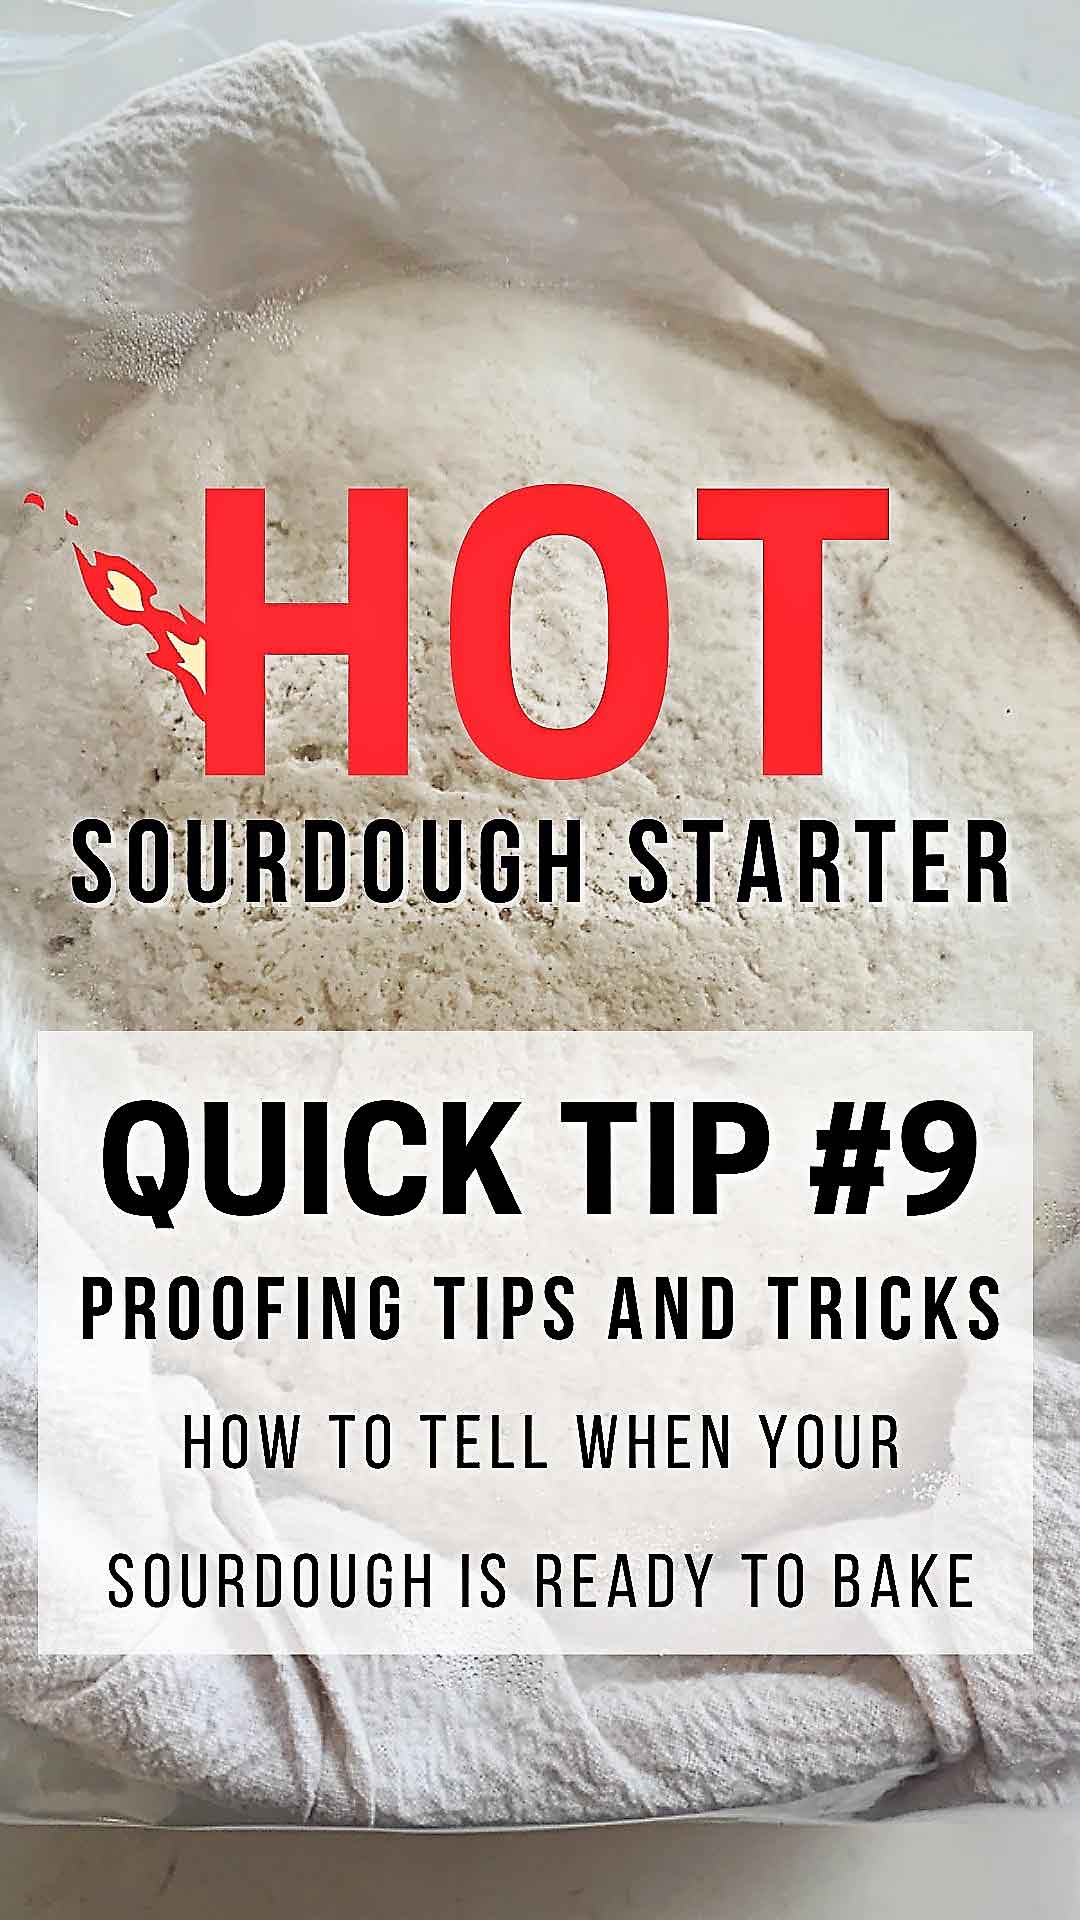 Learn how to tell when your sourdough is ready to bake with these easy proofing tips and tricks! Understanding signs of peak activity is key to baking incredible sourdough! sourdough starter, sourdough tips and tricks